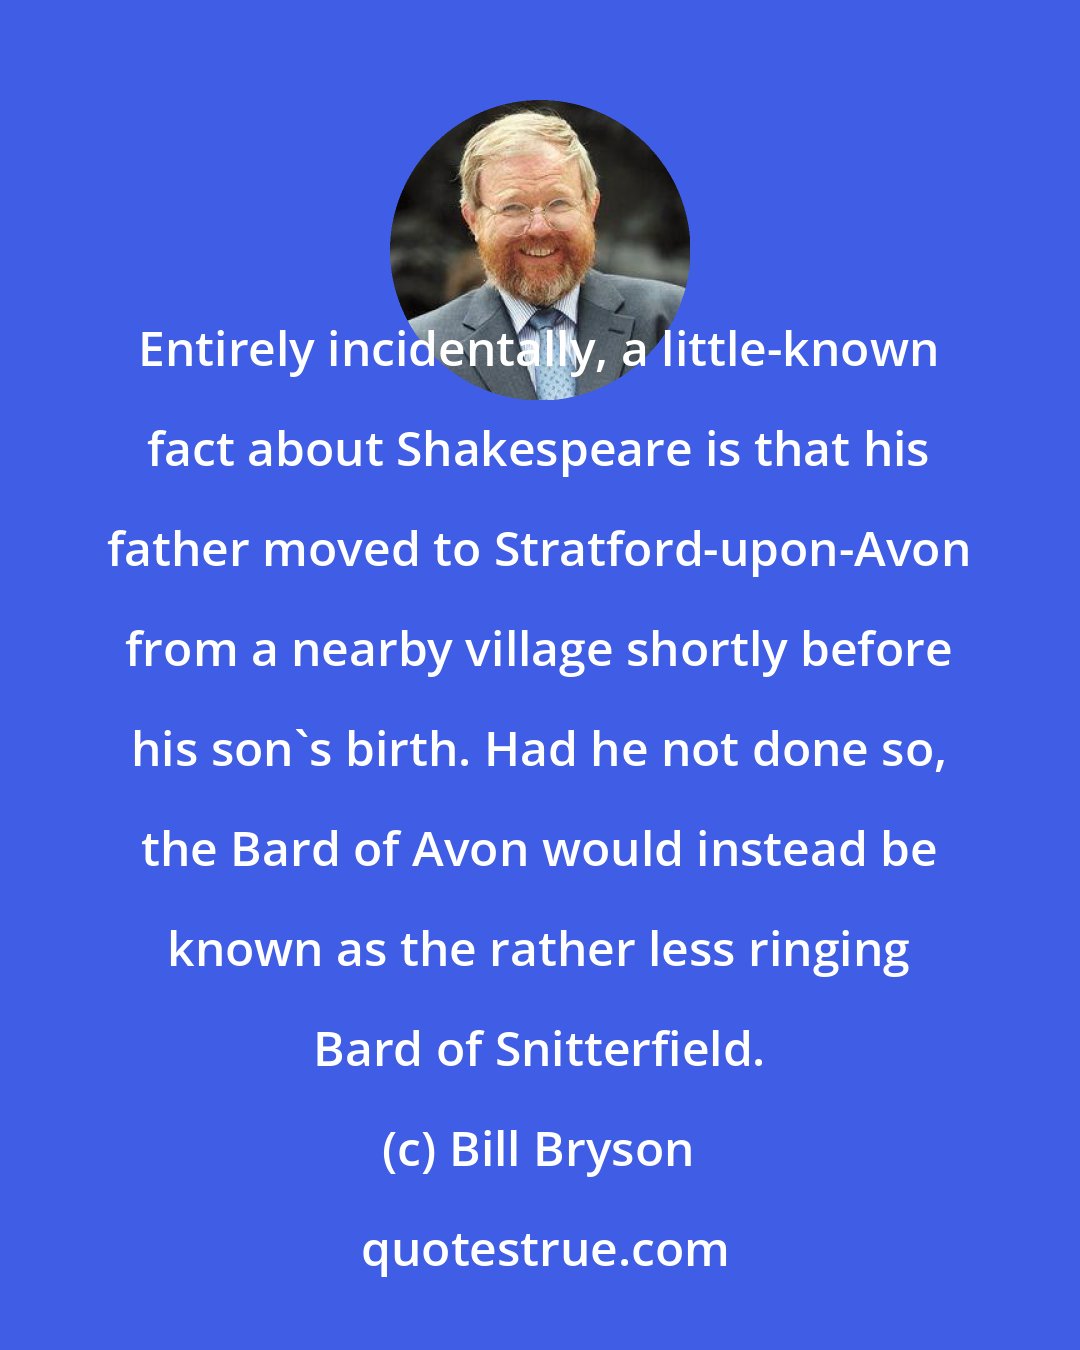 Bill Bryson: Entirely incidentally, a little-known fact about Shakespeare is that his father moved to Stratford-upon-Avon from a nearby village shortly before his son's birth. Had he not done so, the Bard of Avon would instead be known as the rather less ringing Bard of Snitterfield.